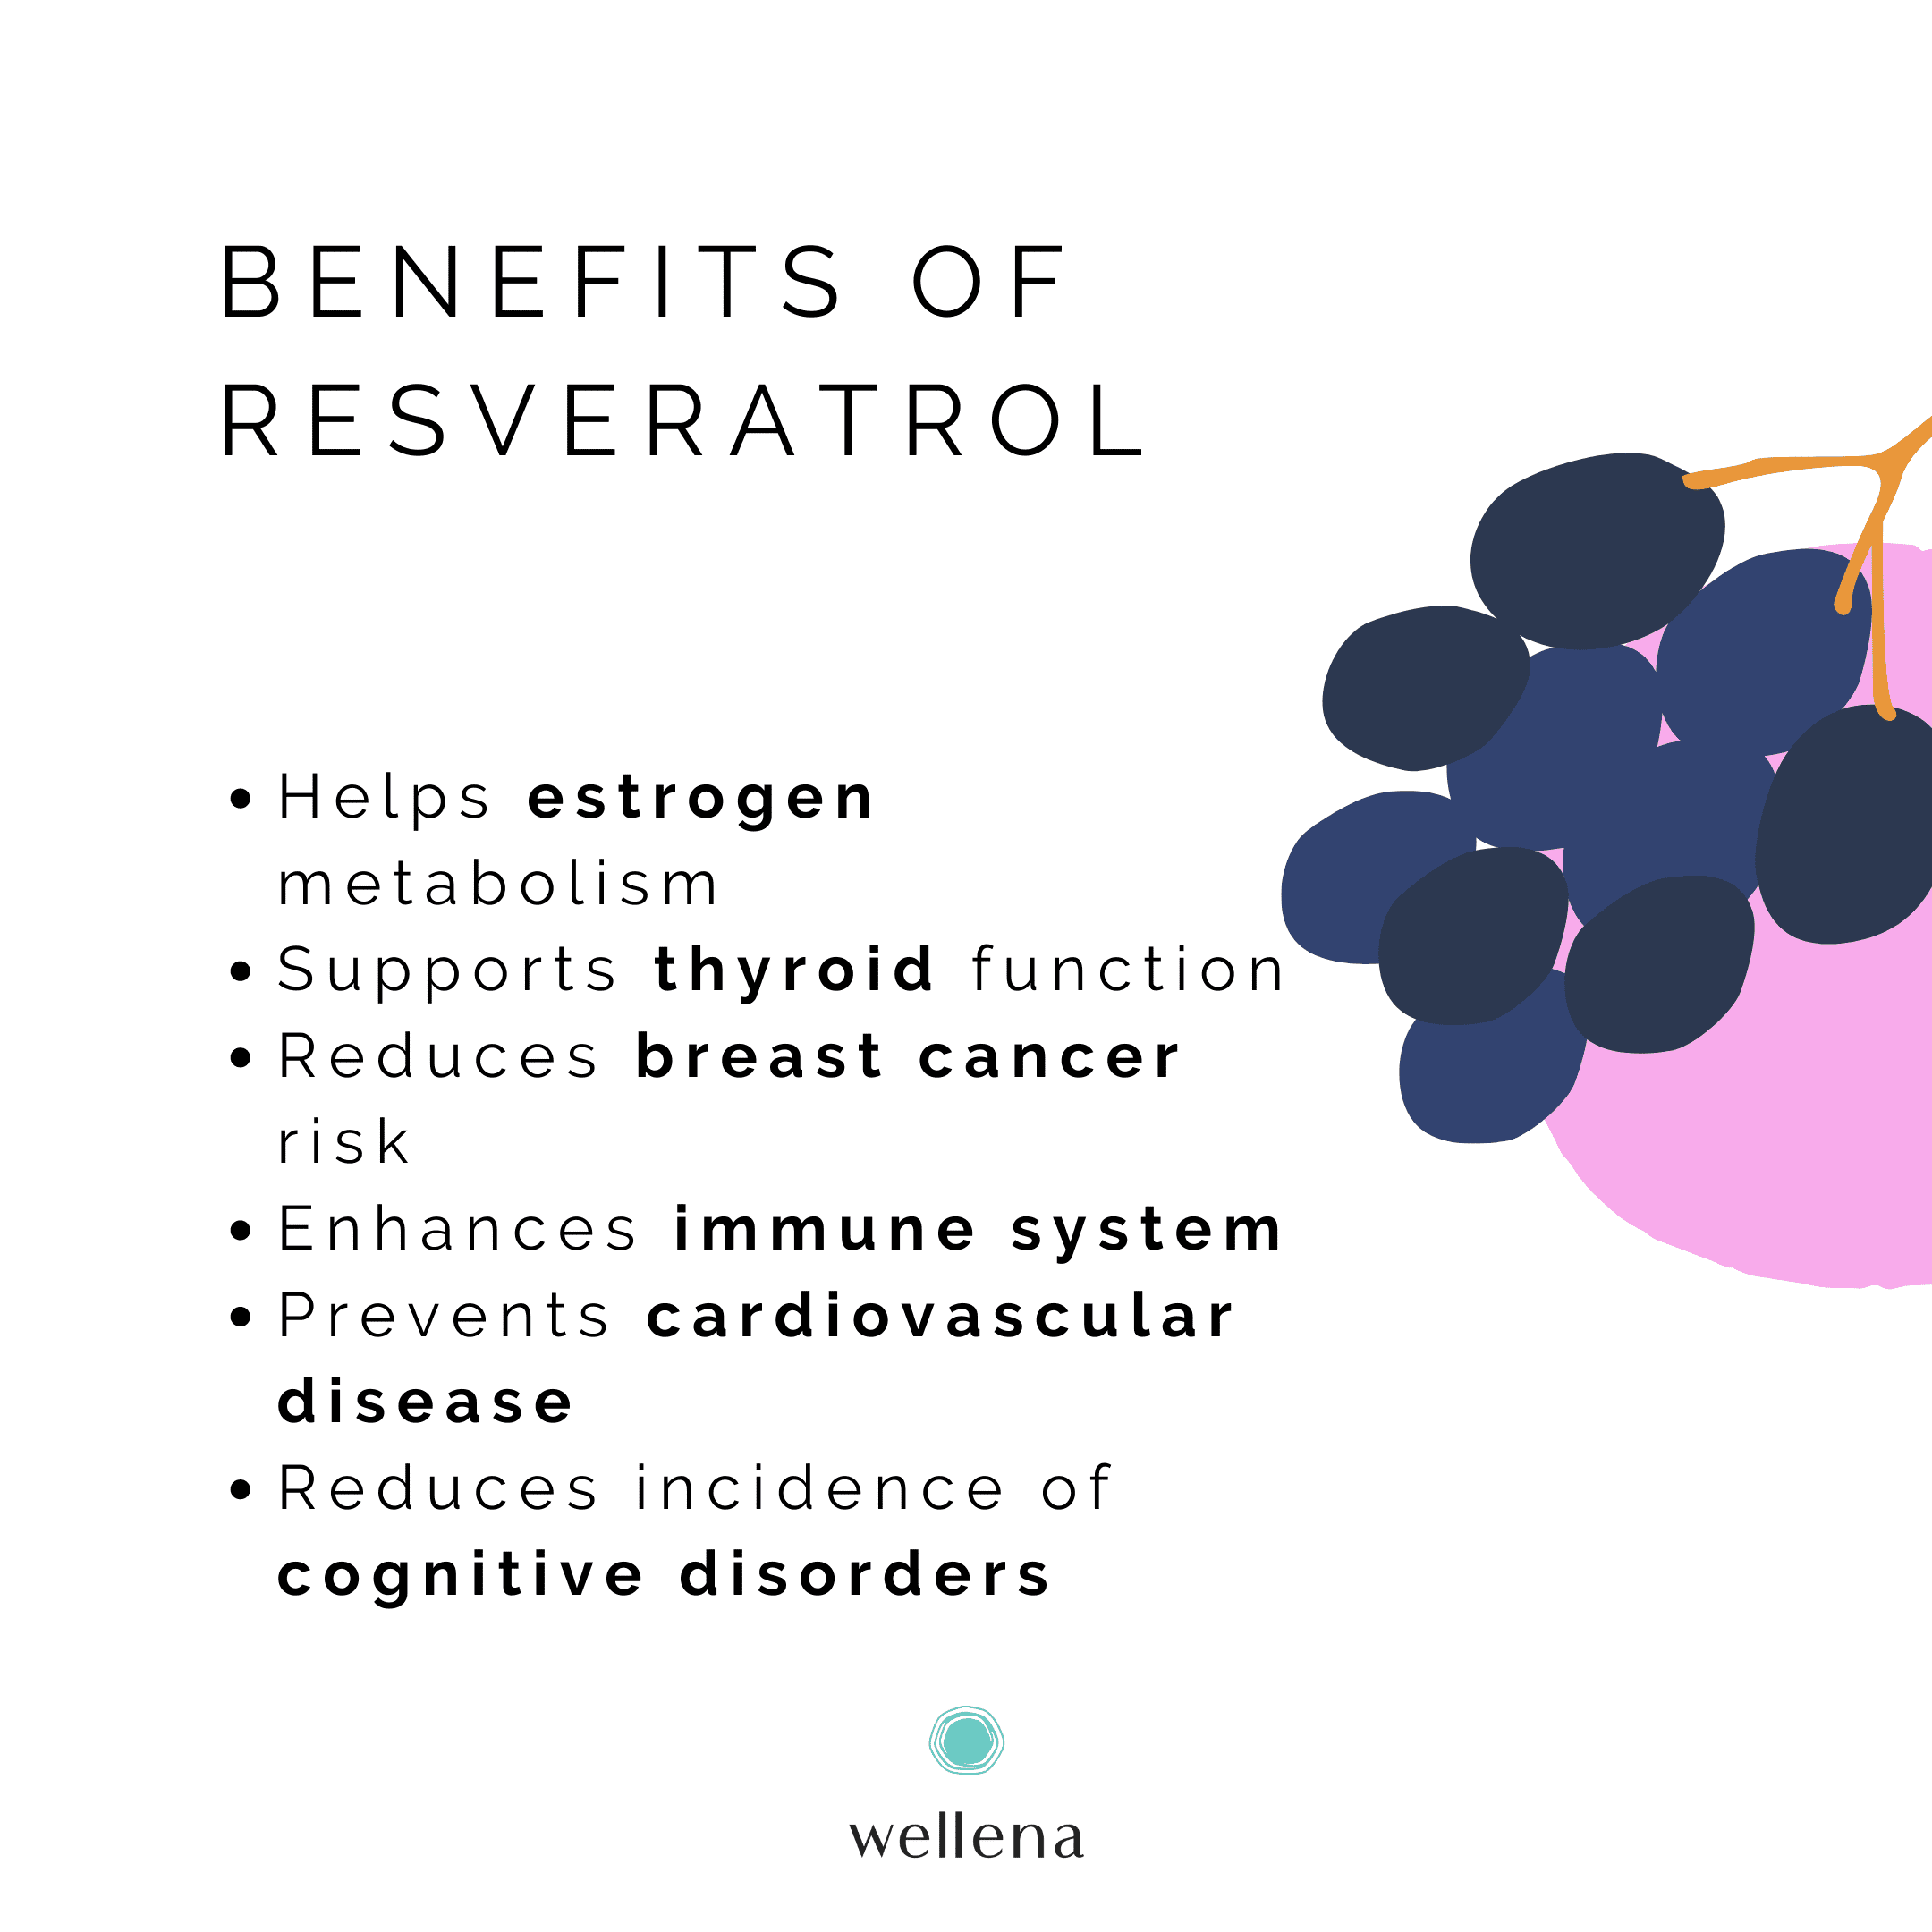 Resveratrol has also been studied for its effects on metabolic syndrome, cardiovascular disease (thanks to the French Paradox), cancer, and neurodegenerative disorders like Azheimer’s disease.